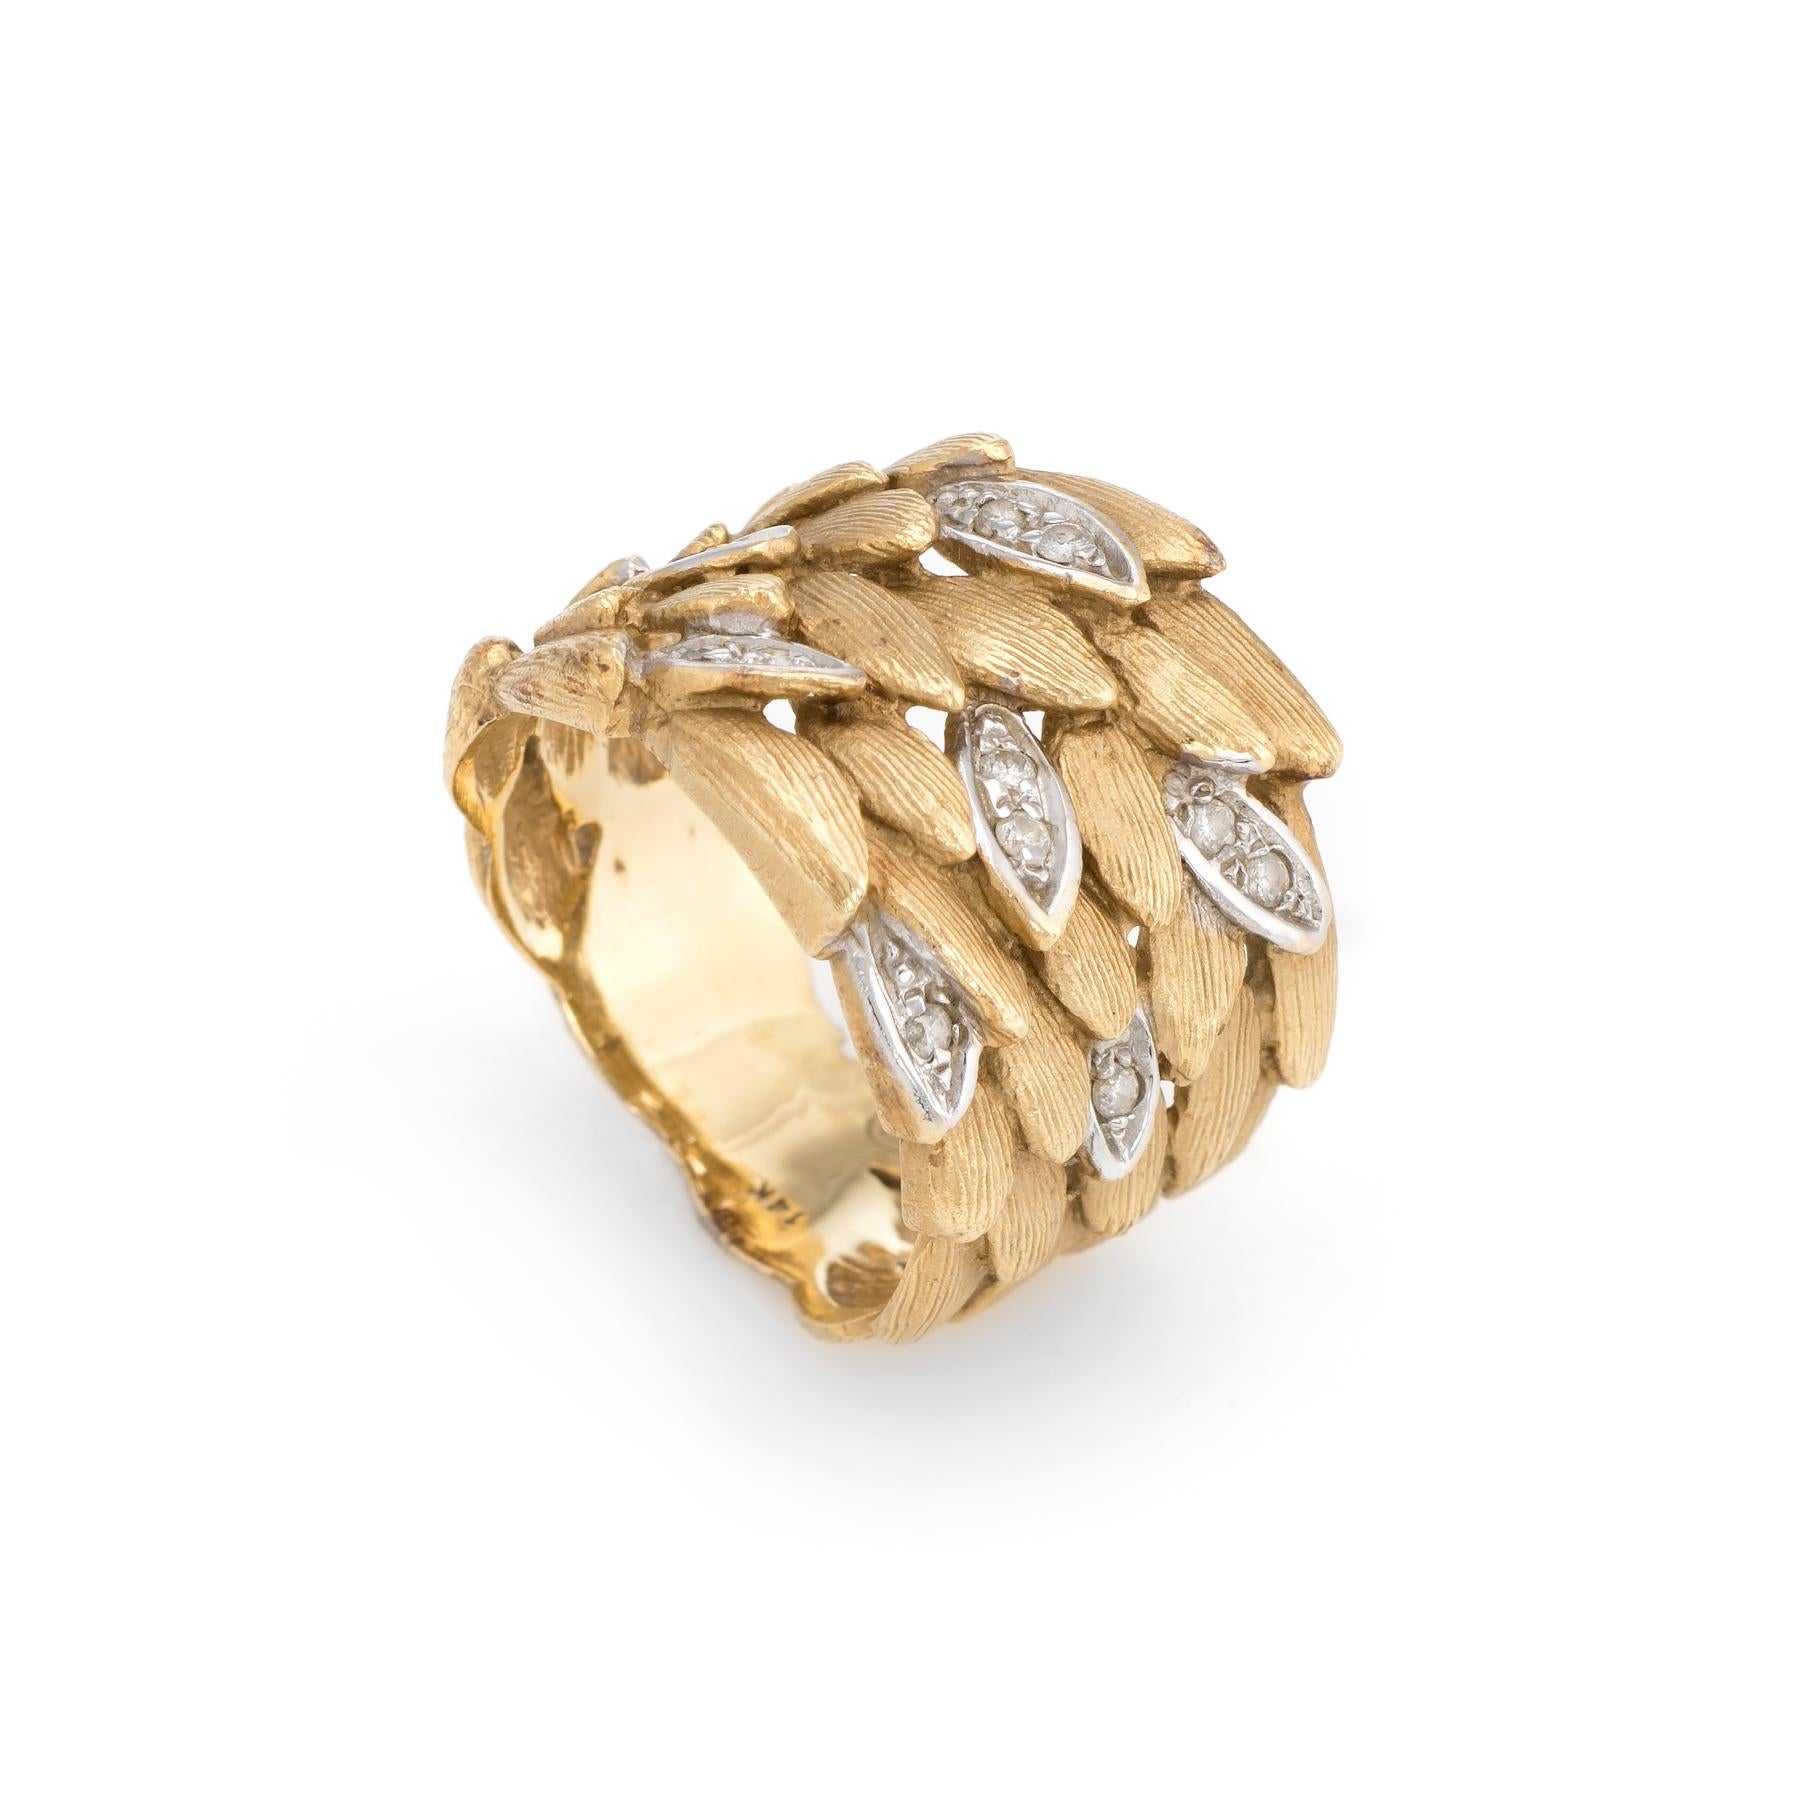 Elegant & finely detailed vintage diamond leaf band (circa 1960s to 1970s), crafted in 14 karat yellow gold. 

12 single cut diamonds are estimated at 0.01 carats each (0.12 carats total estimated weight). The diamonds are estimated at I-J color and